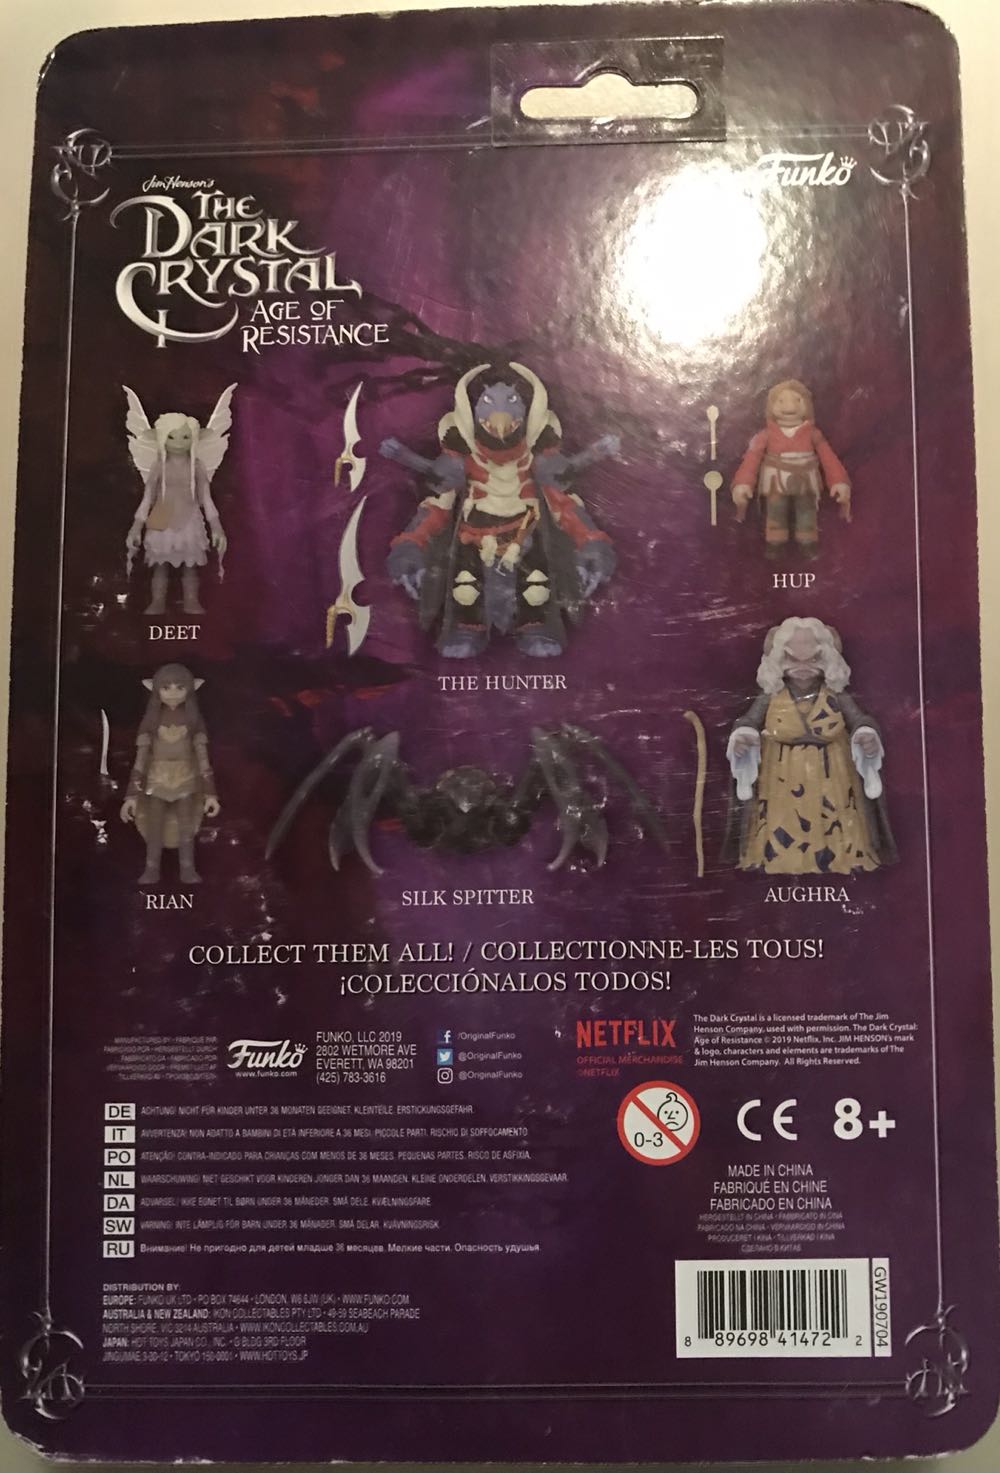 Dark Crystal Hup - Funko/Netflix (The Dark Crystal: Age Of Resistance) action figure collectible [Barcode 889698414722] - Main Image 2